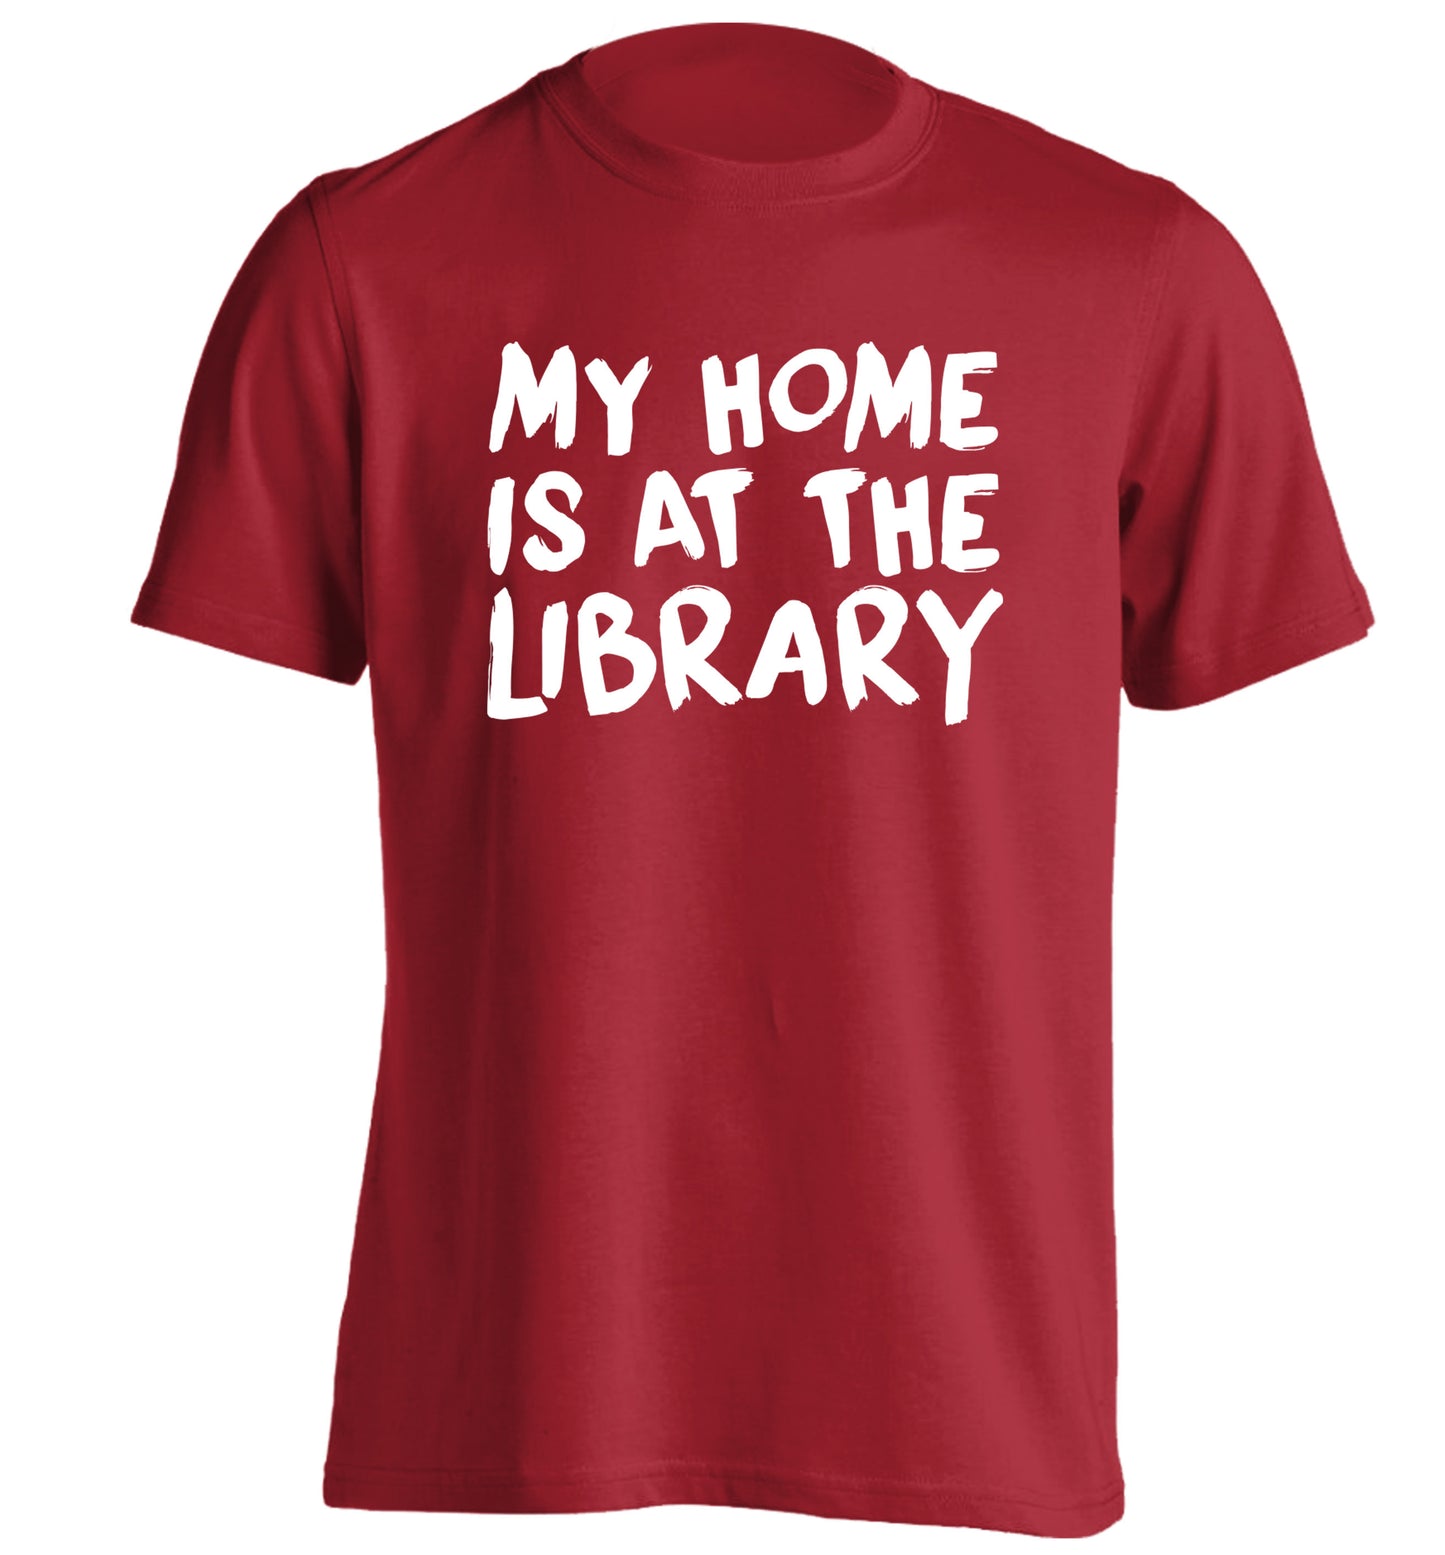 My home is at the library adults unisex red Tshirt 2XL